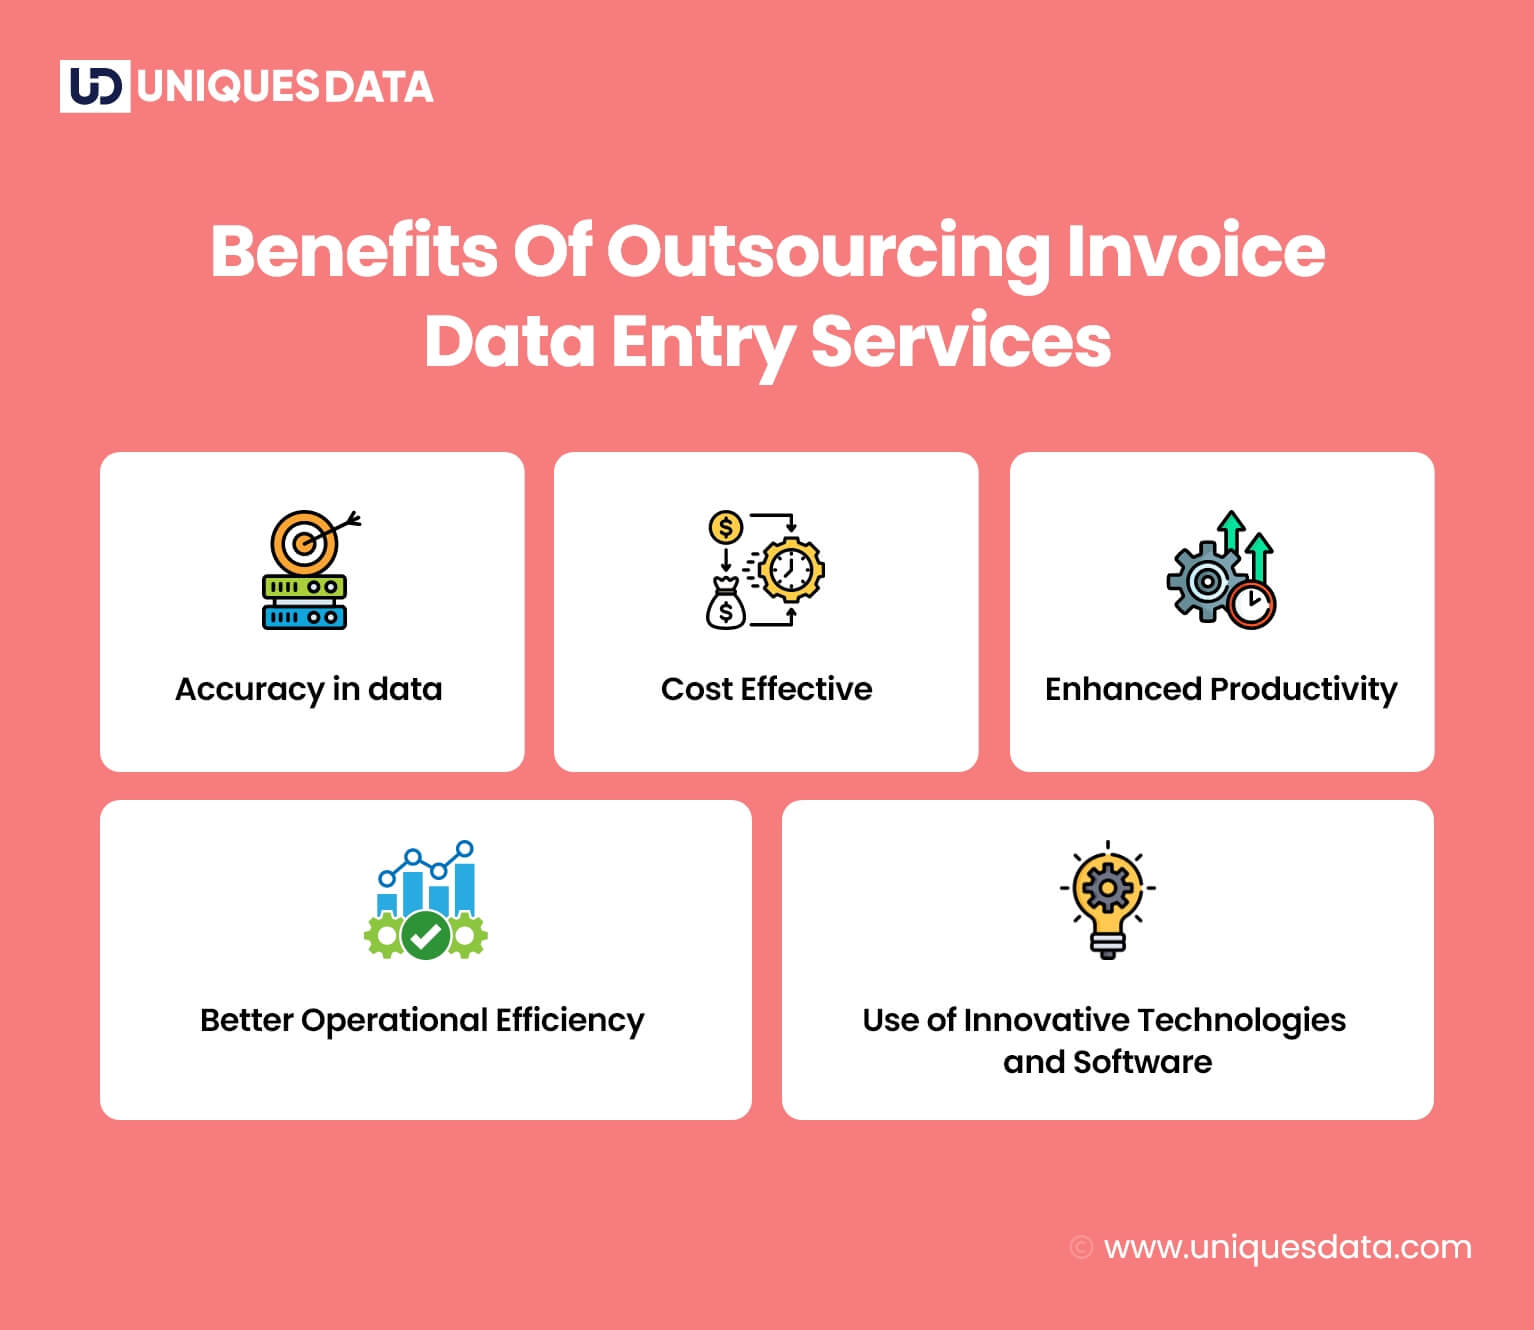 Benefits Of outsourcing invoice data entry Services